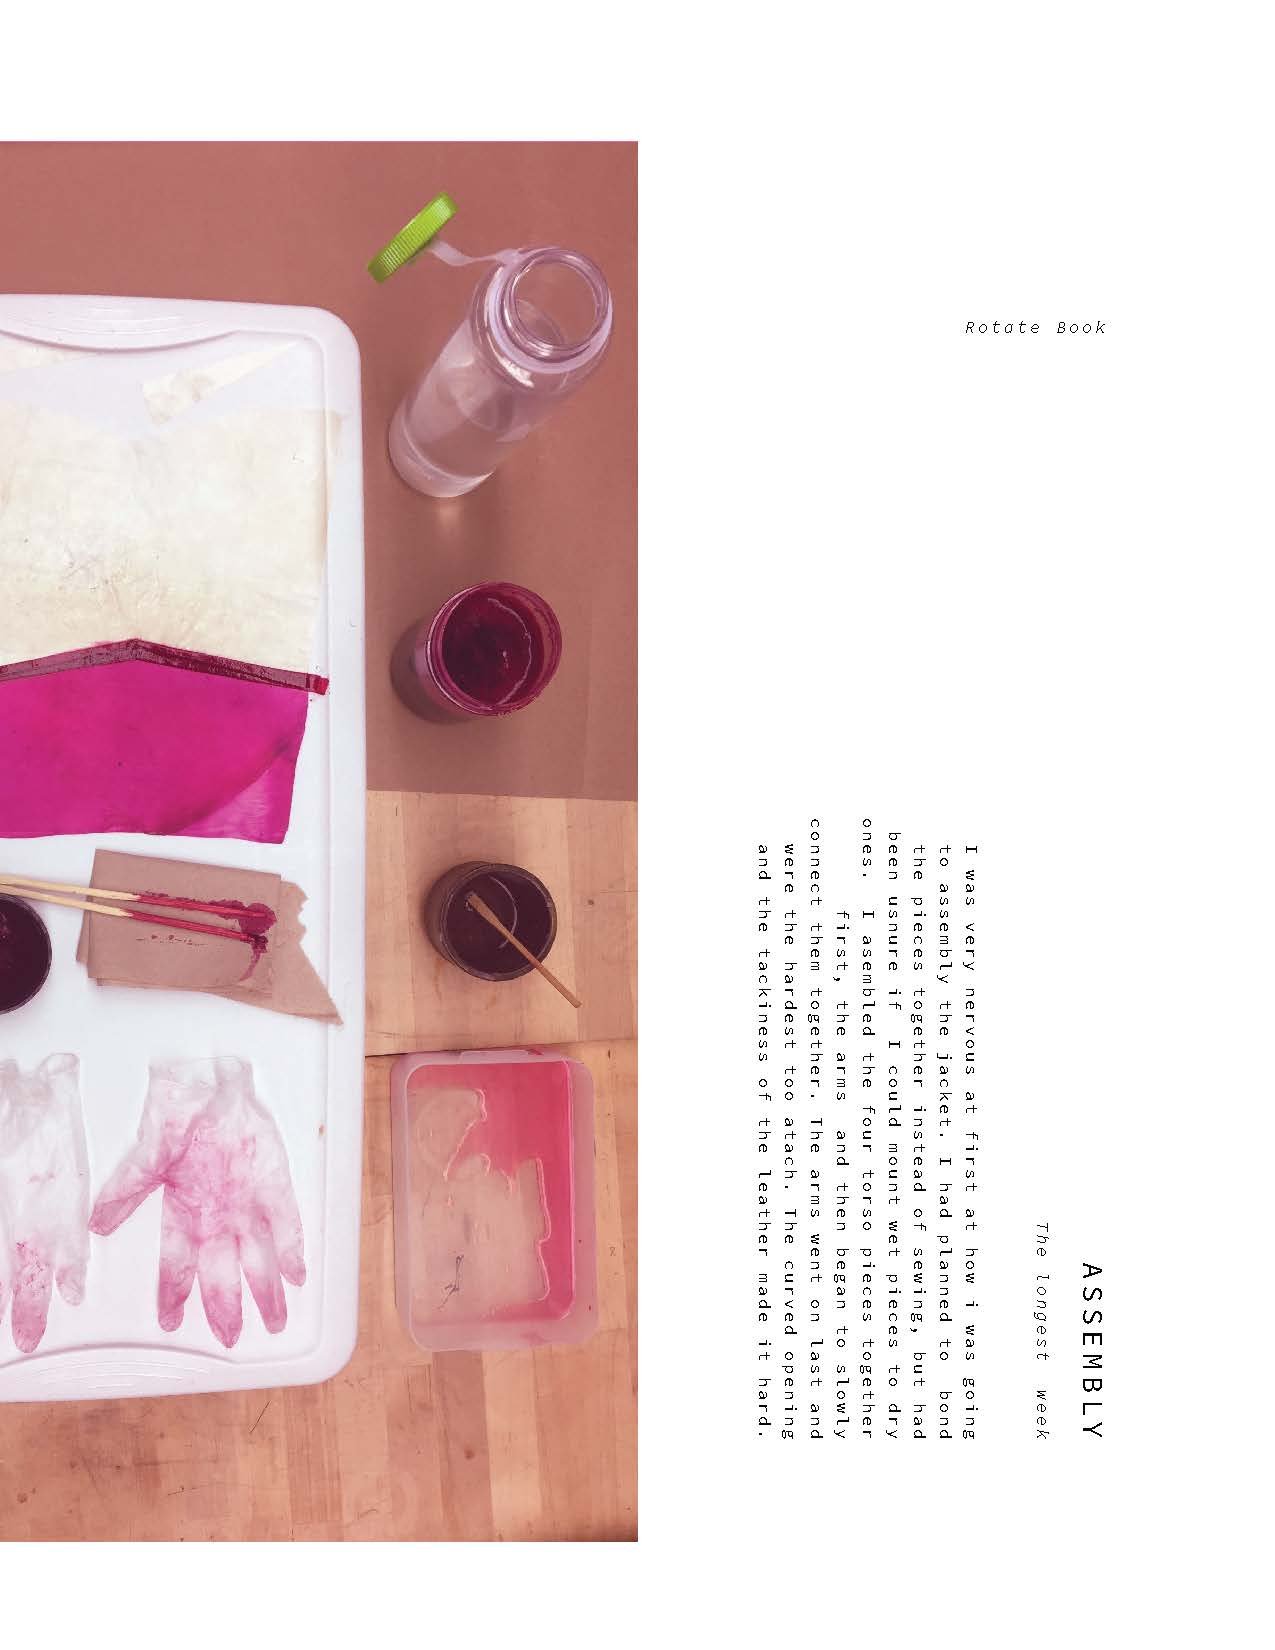 lily_steiner_process_book_Print_Page_37.jpg